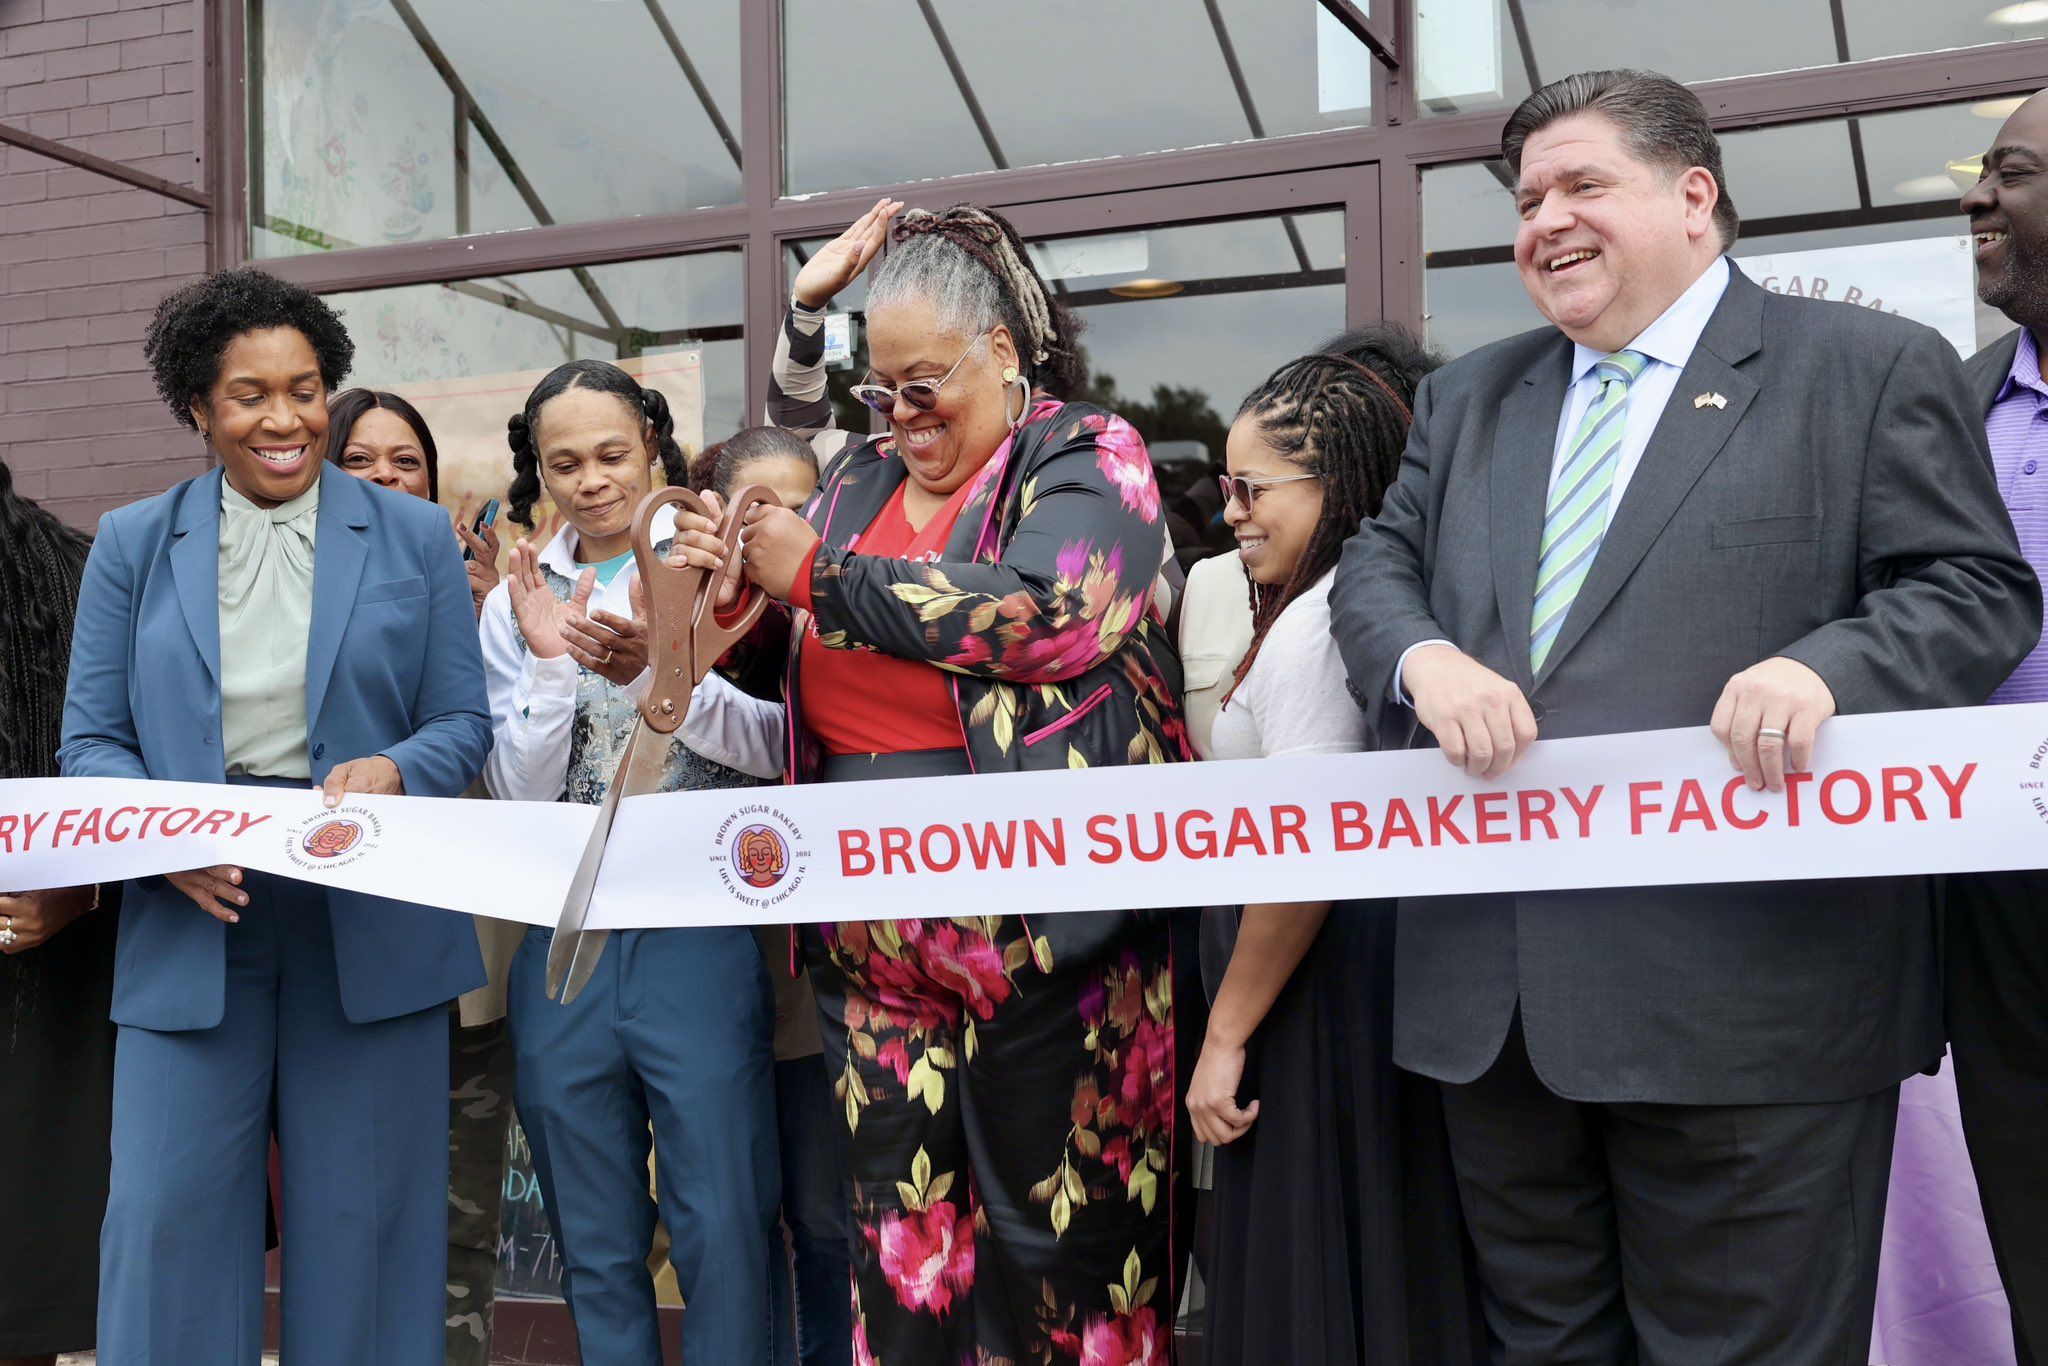 Stephanie Hart stands next to Gov. JB Pritzker with giant scissors, cutting tape that says "Brown Sugar Bakery Factory."